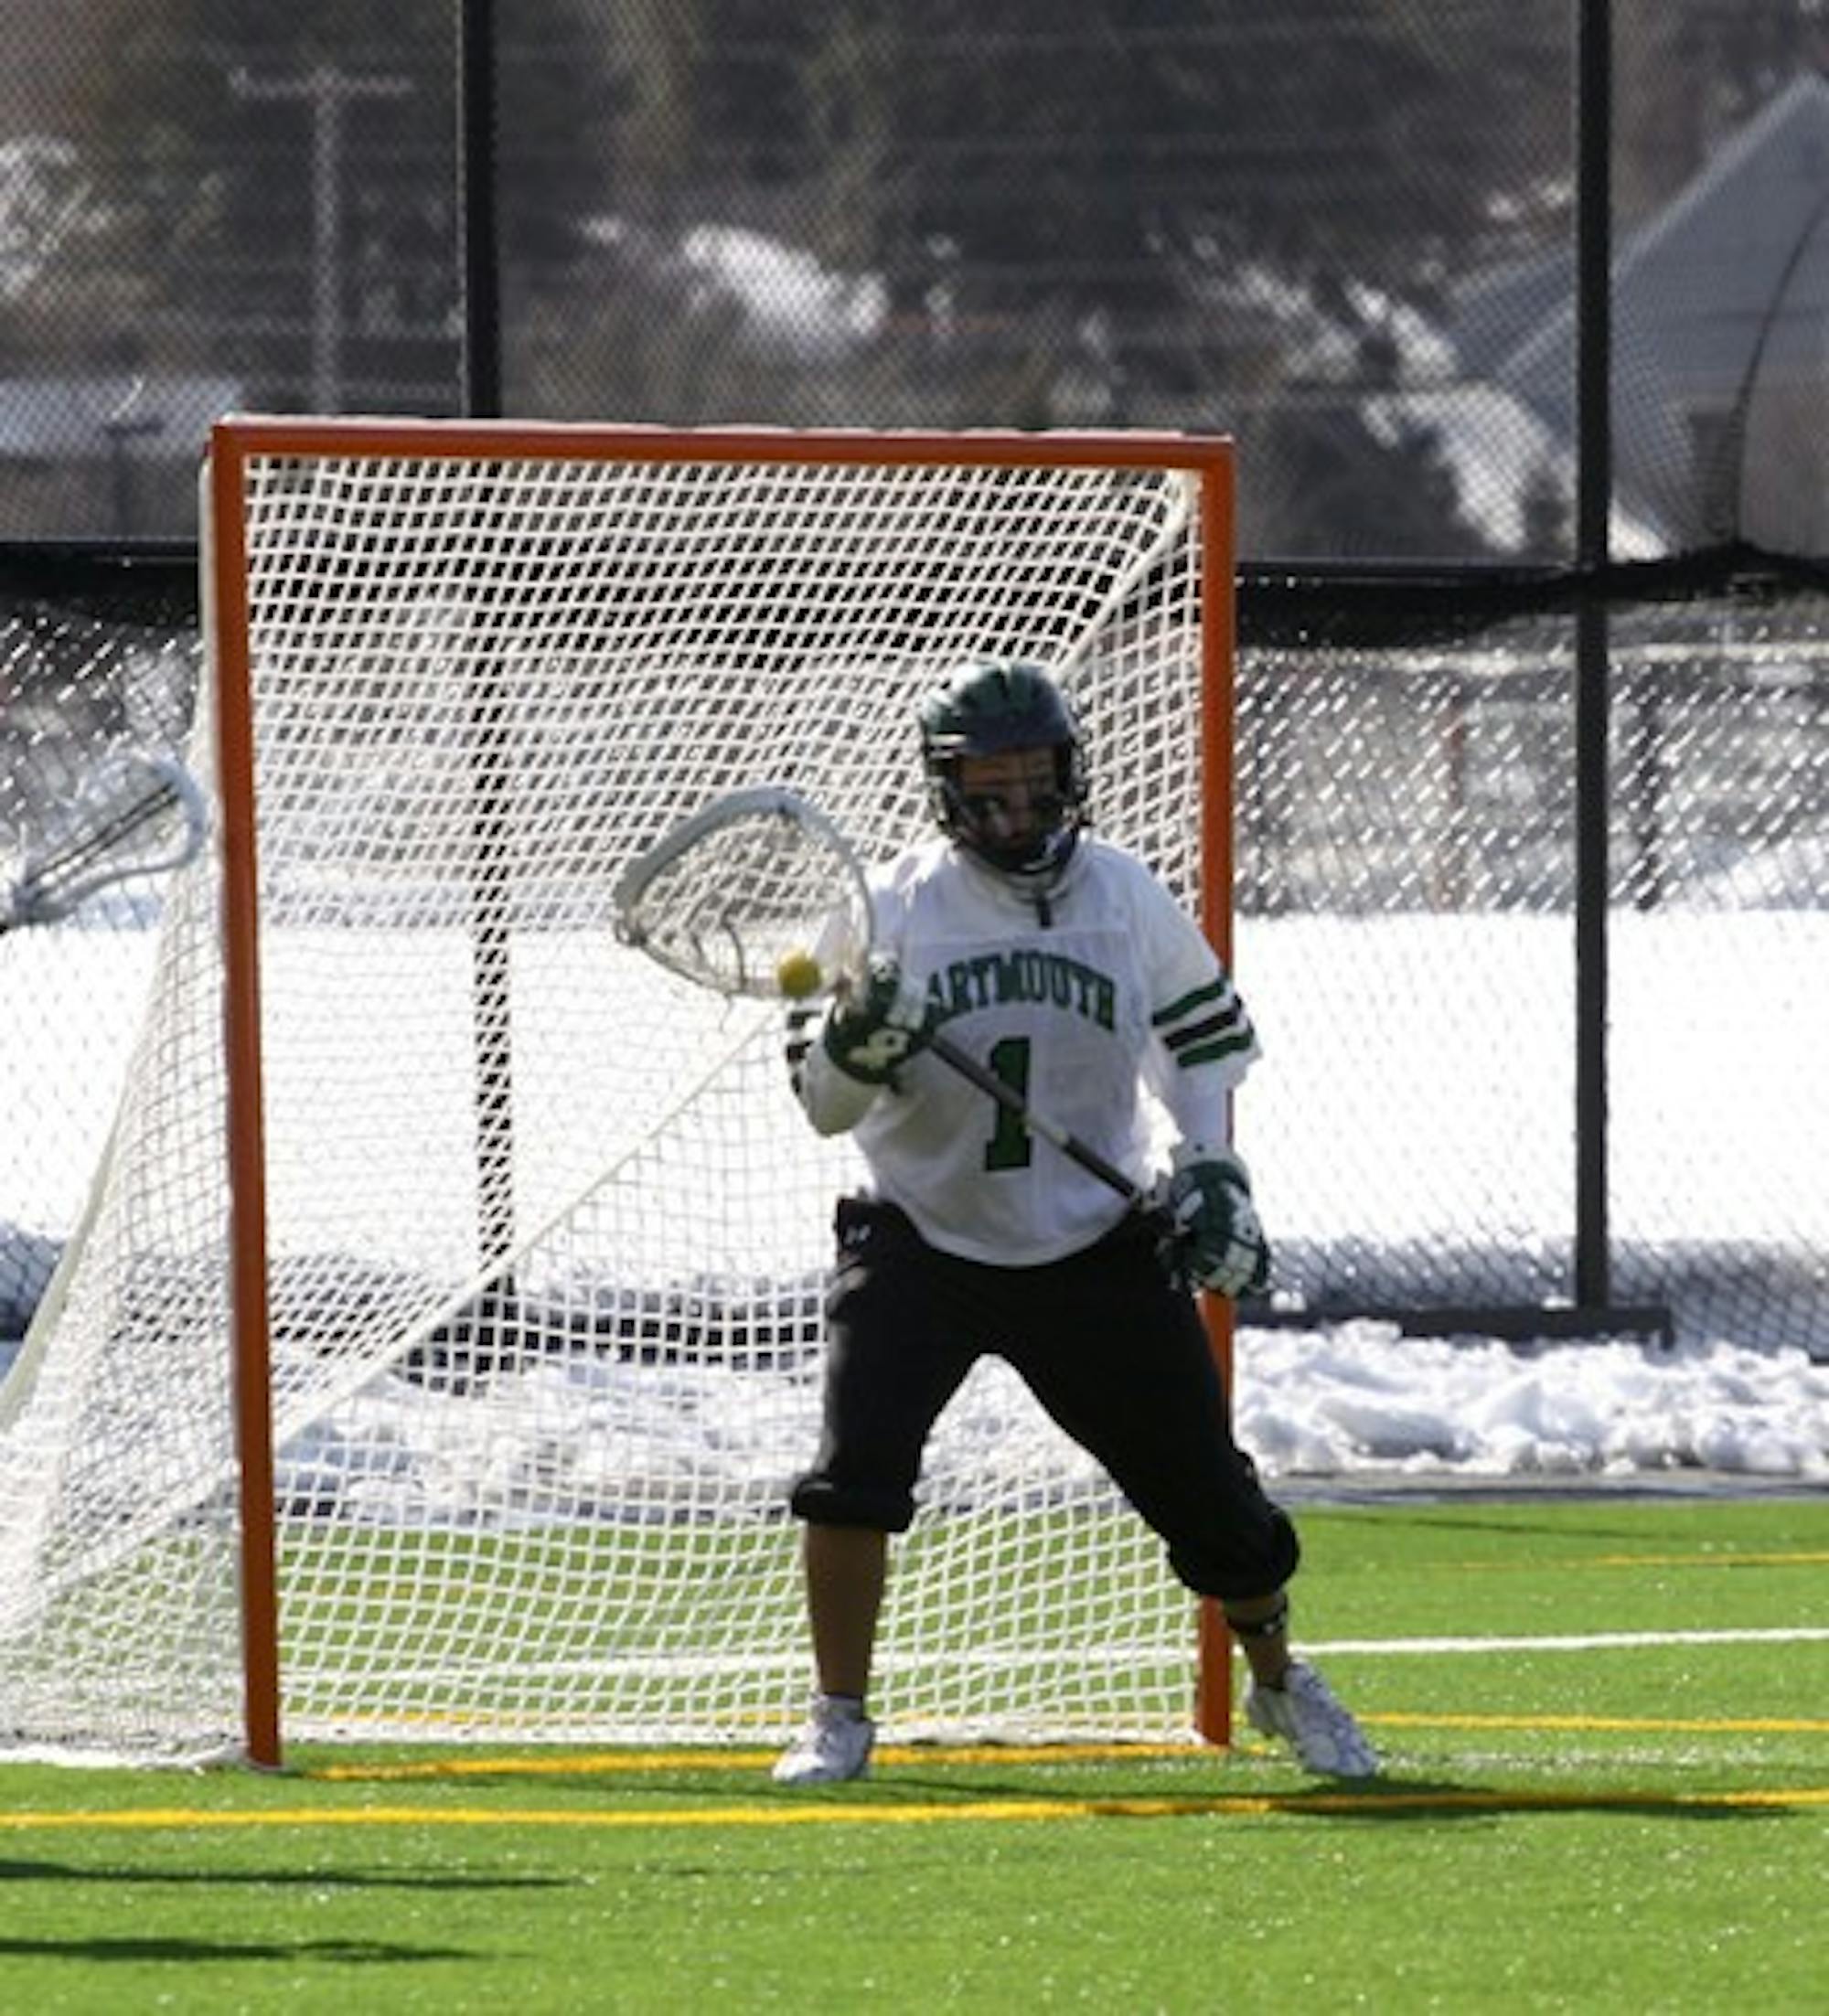 Co-captain Julie Wadland '10 had nine saves in Dartmouth's 16-1 victory over Brown on March 28.